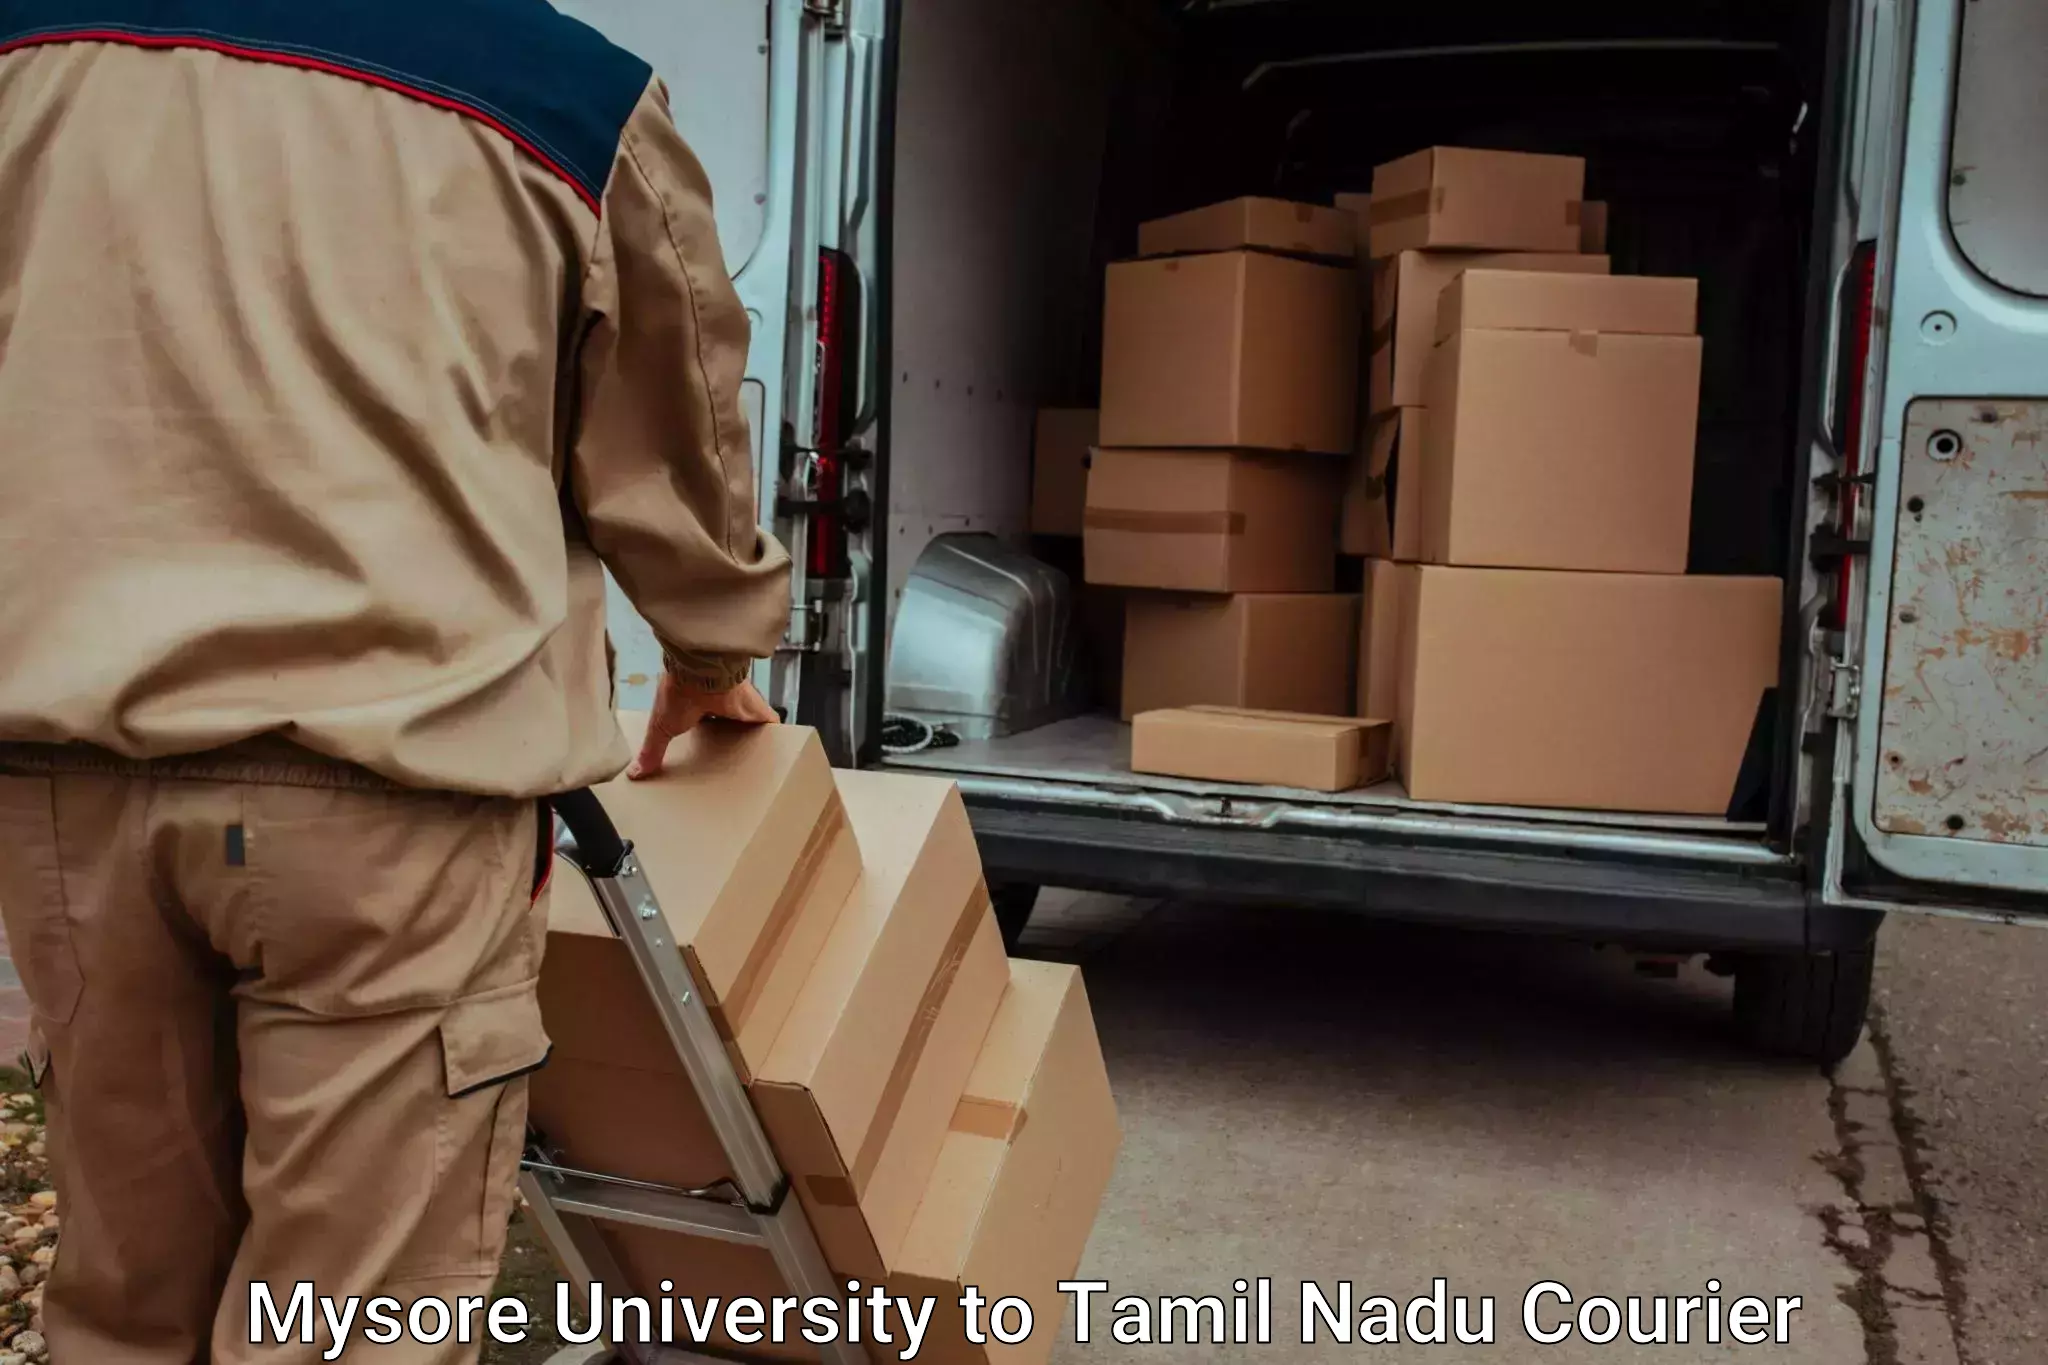 Furniture moving specialists in Mysore University to Vellore